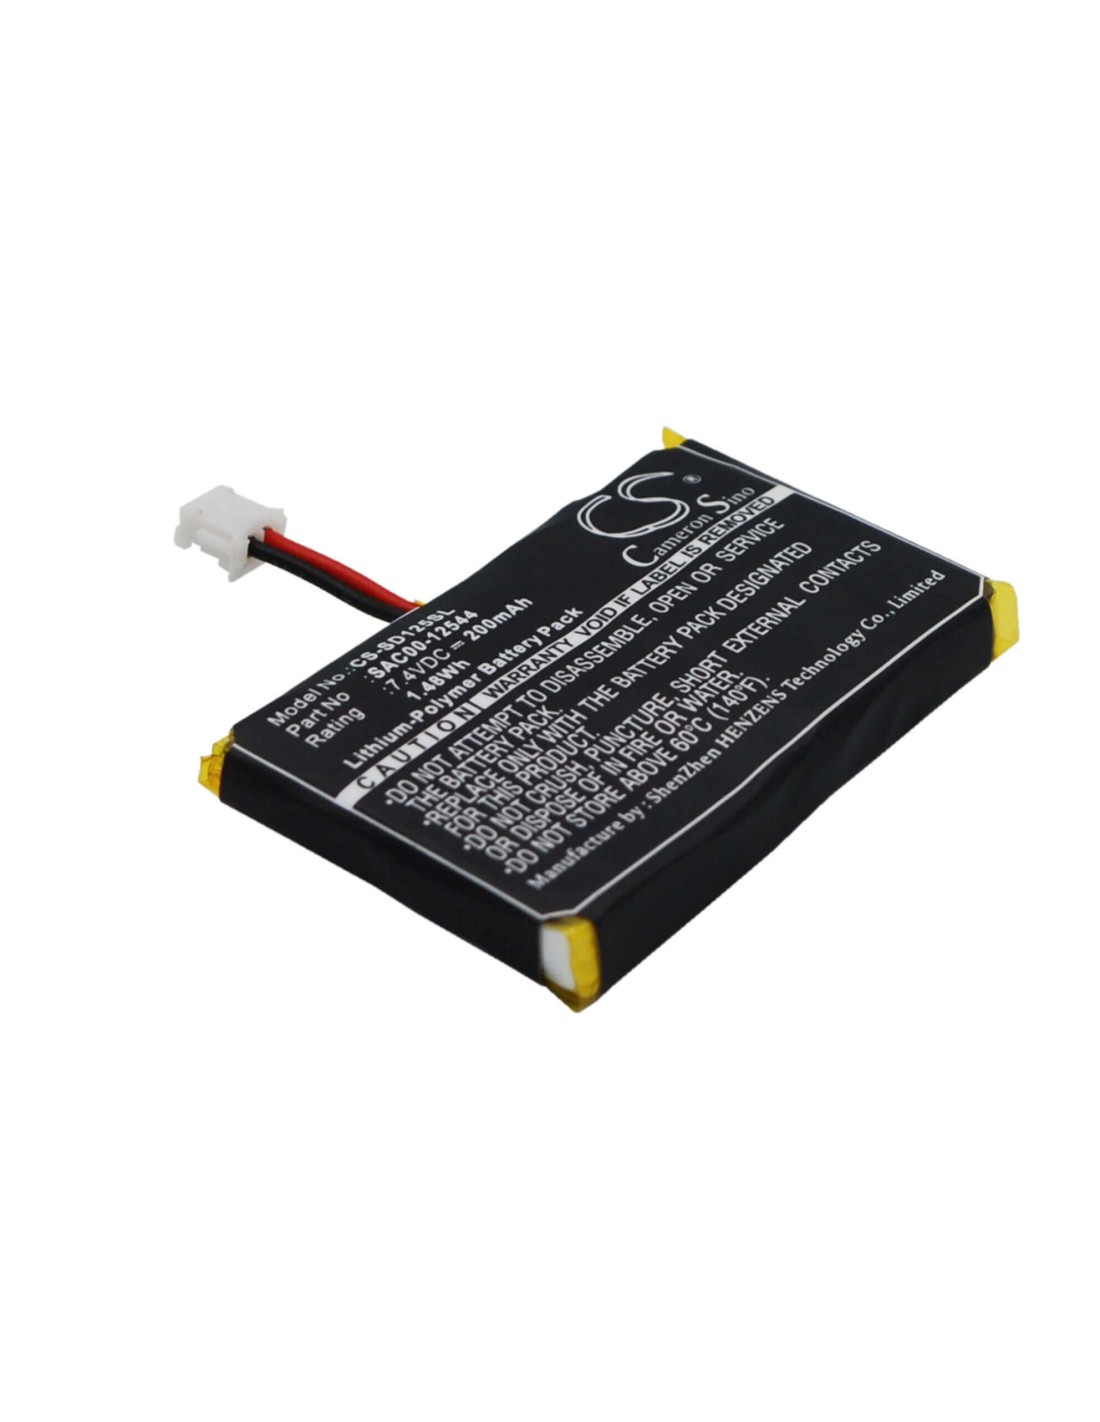 Battery for Sportdog Sd-1225 Trainer Receiver, Sd-1825 Trainer Receiver, Sd-2525 Trainer Receiver 7.4V, 200mAh - 1.48Wh